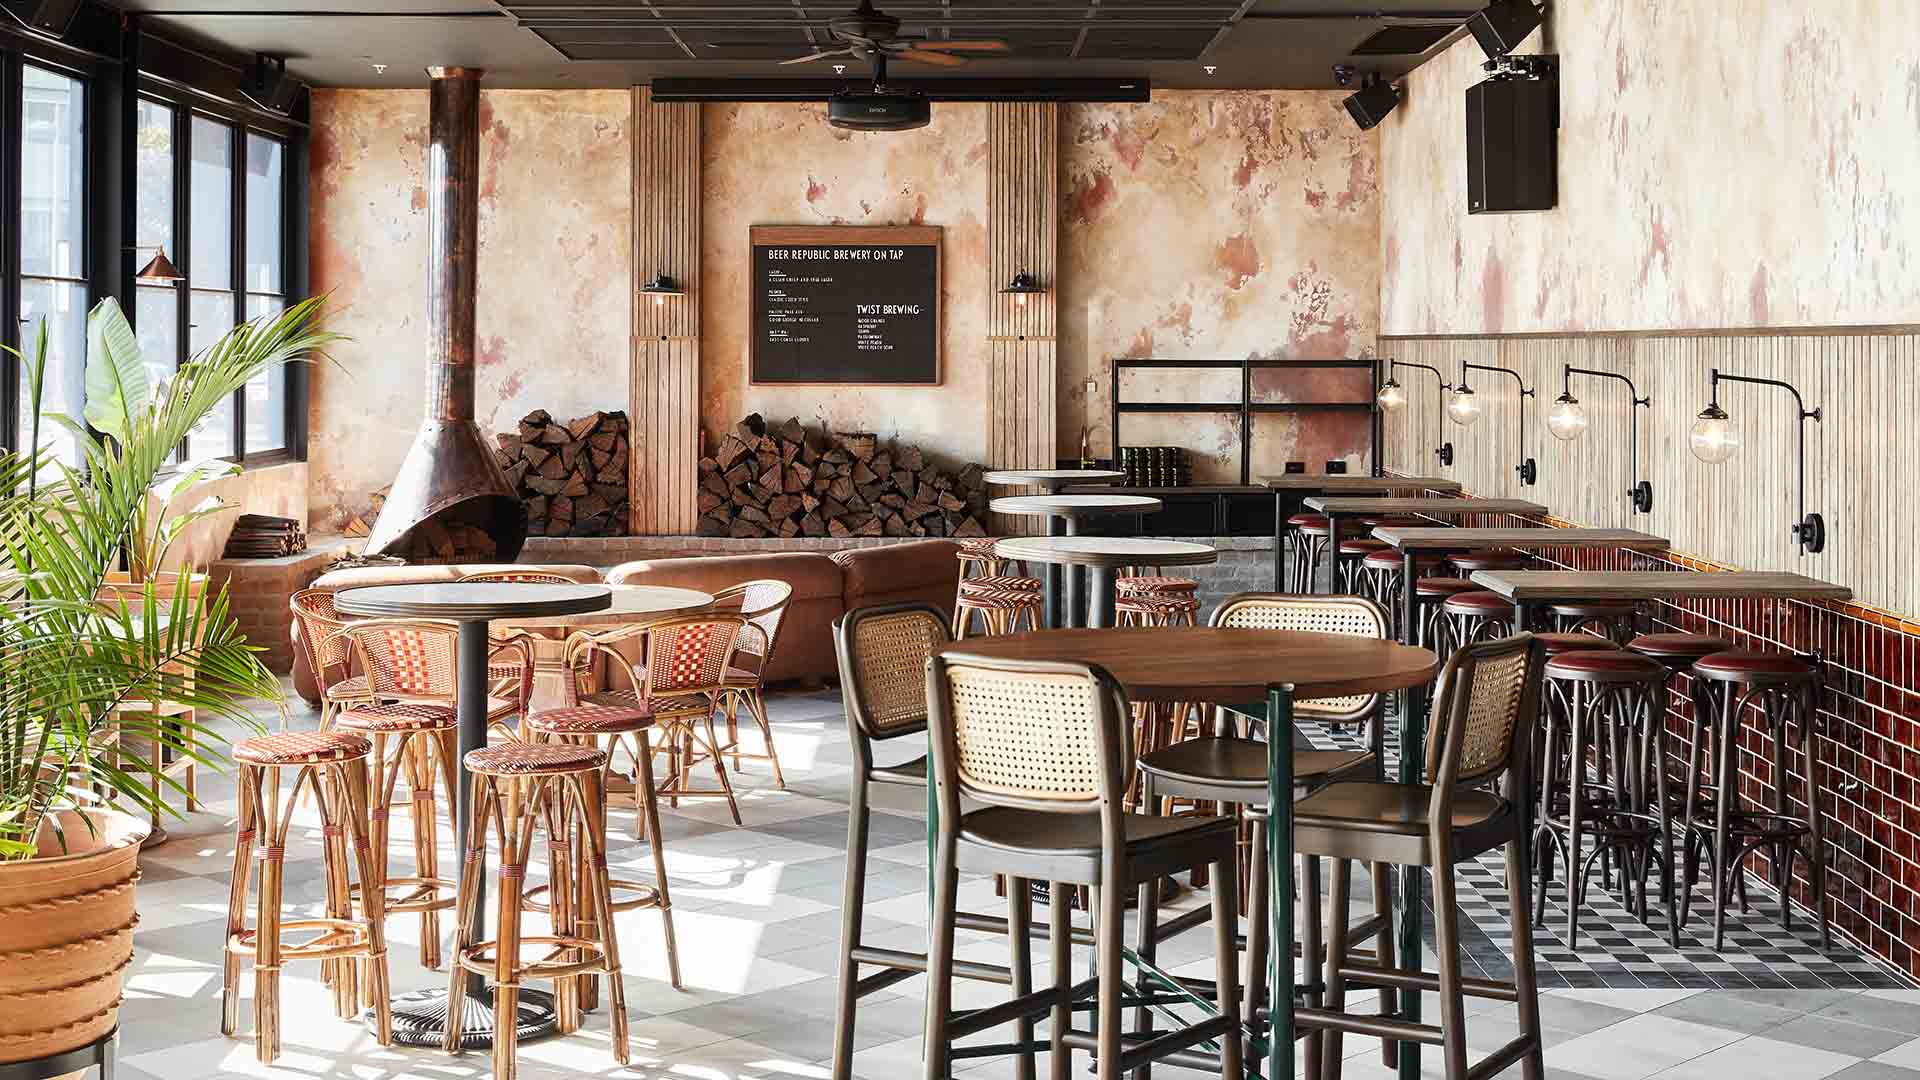 Republic Tavern Is the Rustic New Brewpub Serving Up Craft Beers in Melbourne's North